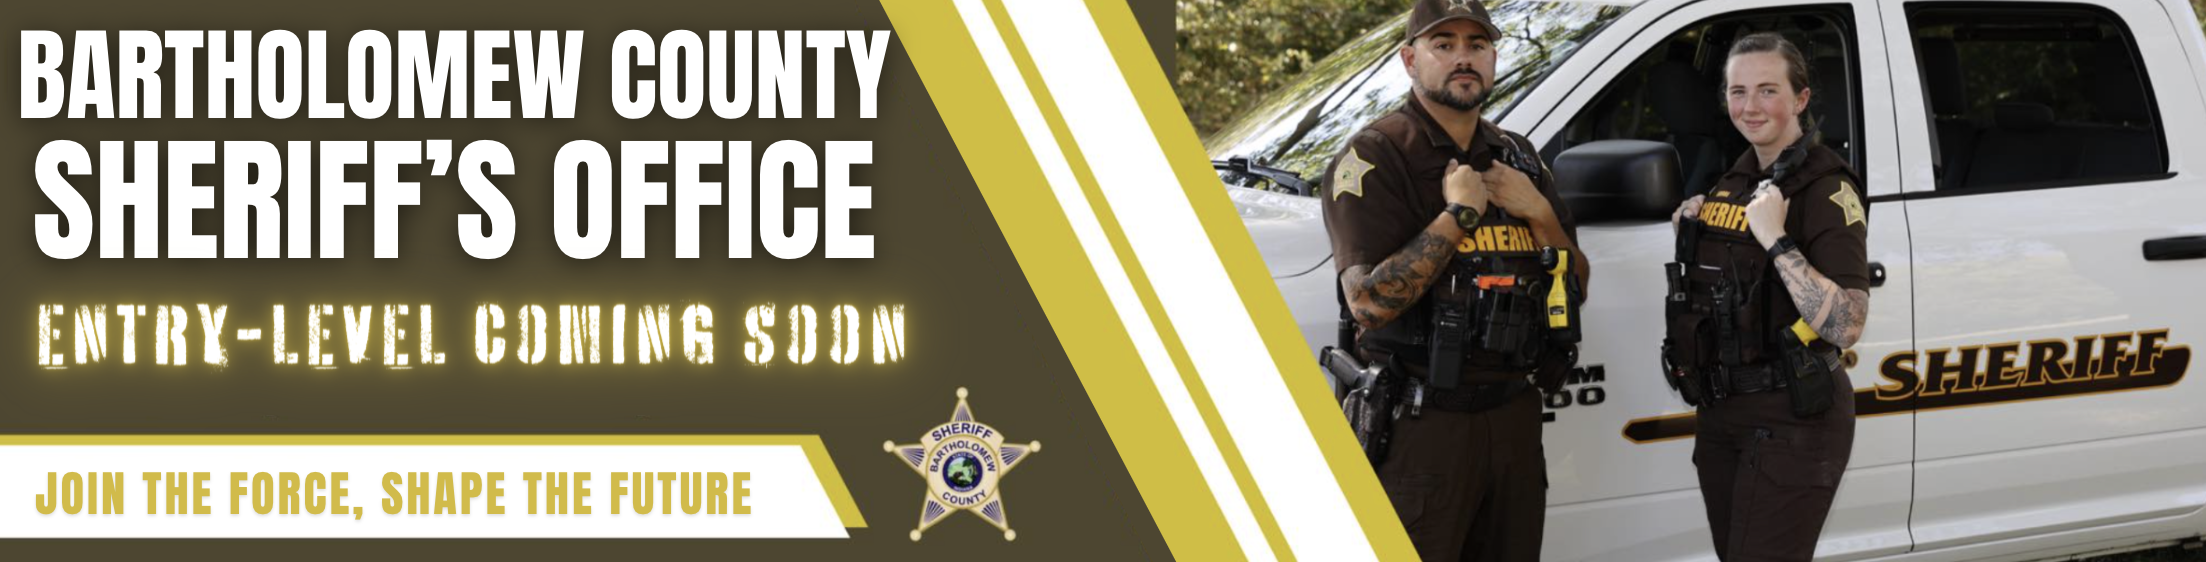 Bartholomew County Sheriff Department, IN Public Safety Jobs